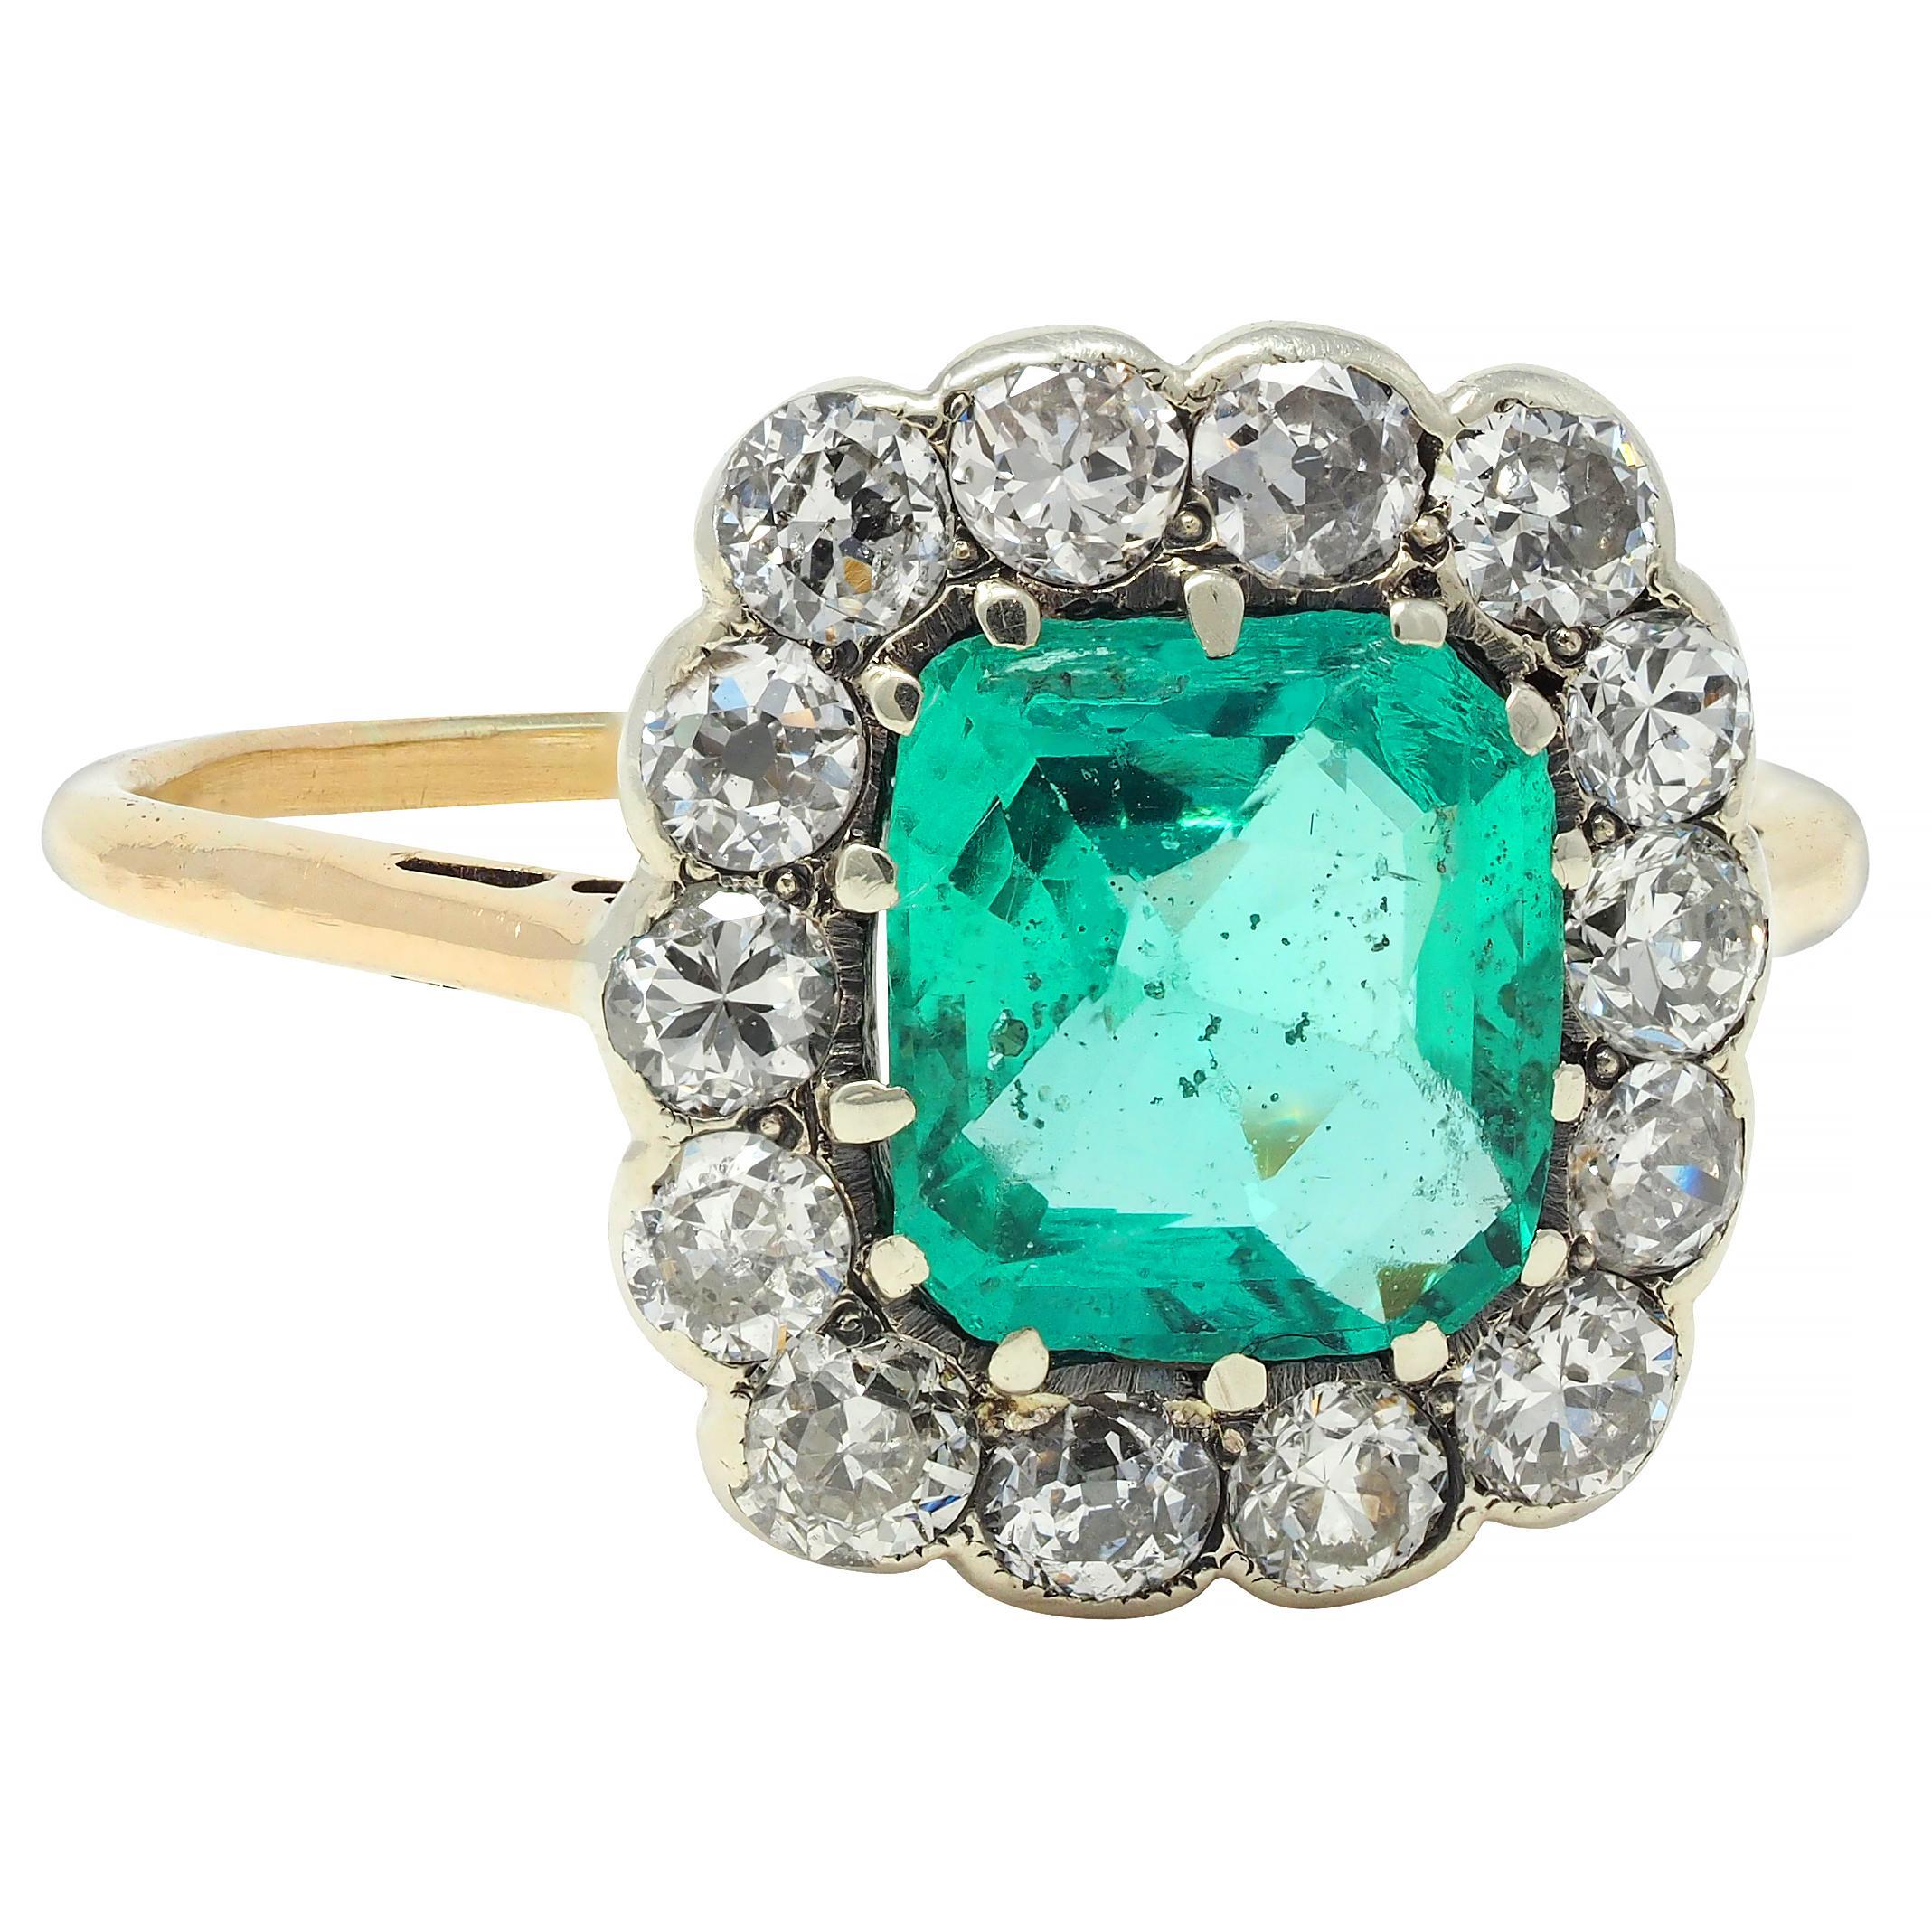 Centering a cushion cut emerald weighing 1.45 carats - transparent green in color 
Natural Colombian in origin with no indications of clarity enhancement 
Prong set in silver-topped head with a halo surround of diamonds
Old European cut and weighing